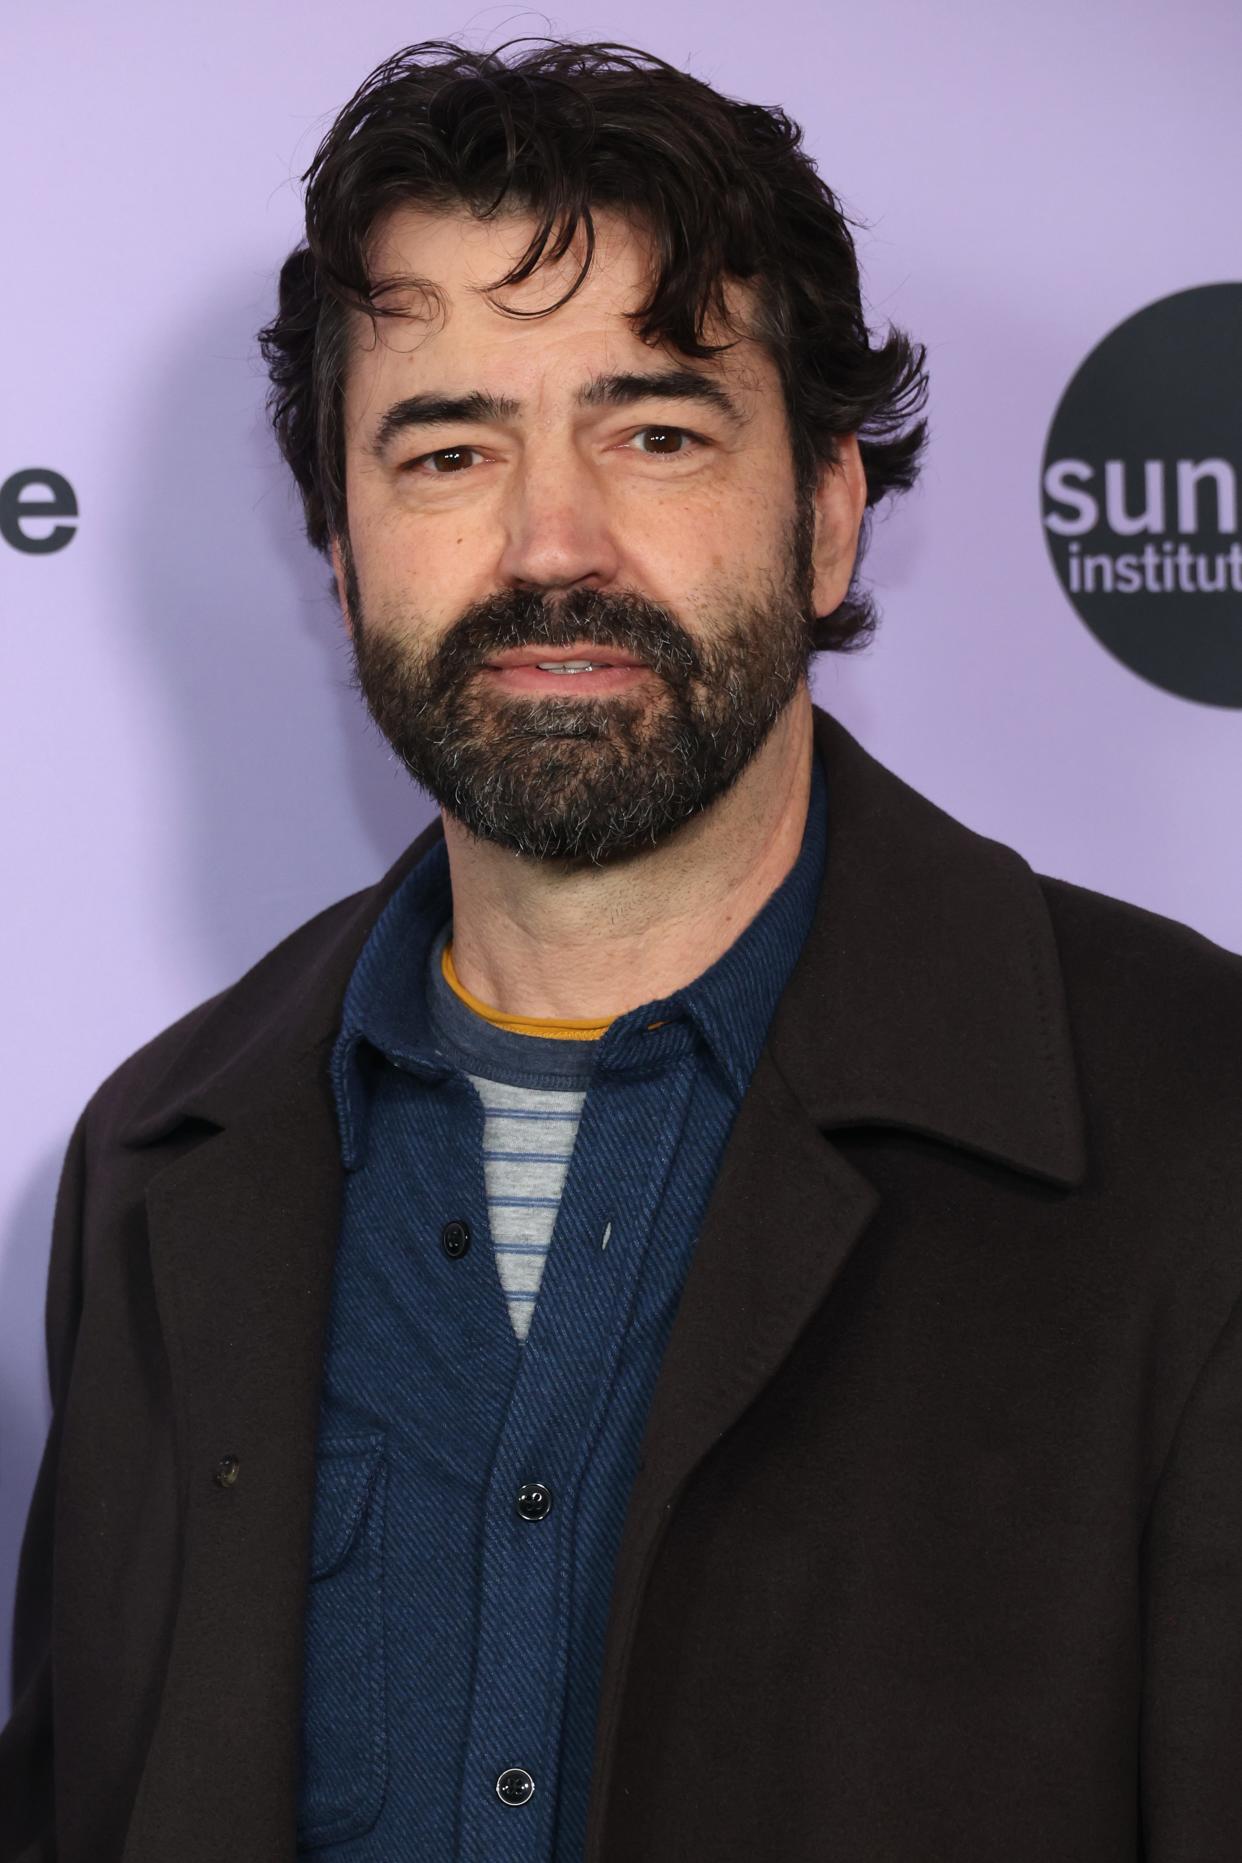 Ron Livingston of "Office Space" and "Band of Brothers" fame grew up in Cedar Rapids.